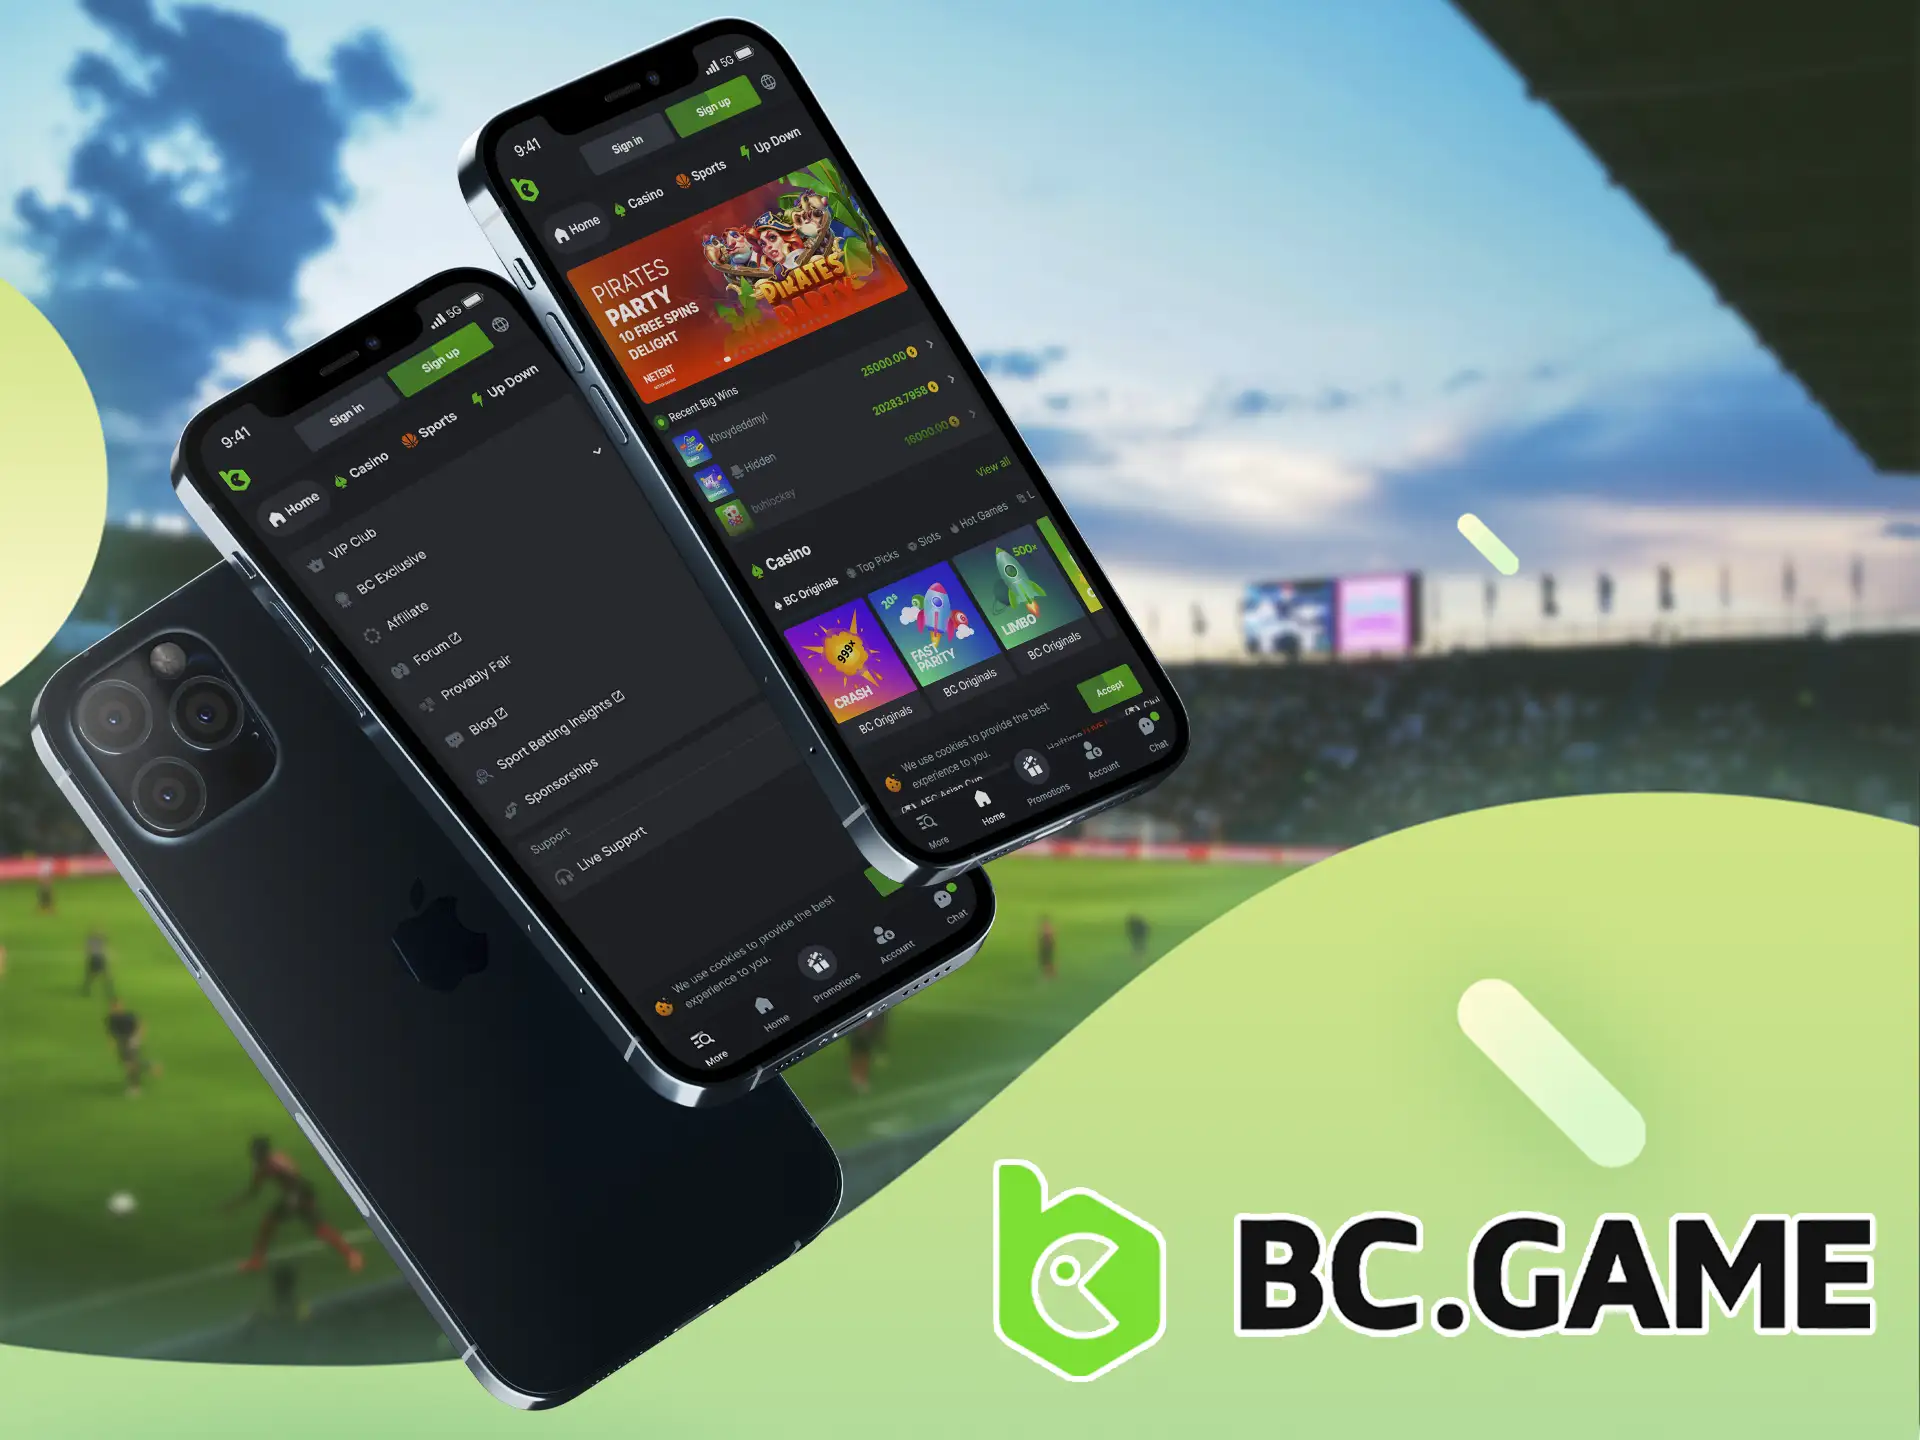 BC GAME values all its players, offers an innovative software solution for smartphones - where you can enjoy the game in any convenient place.